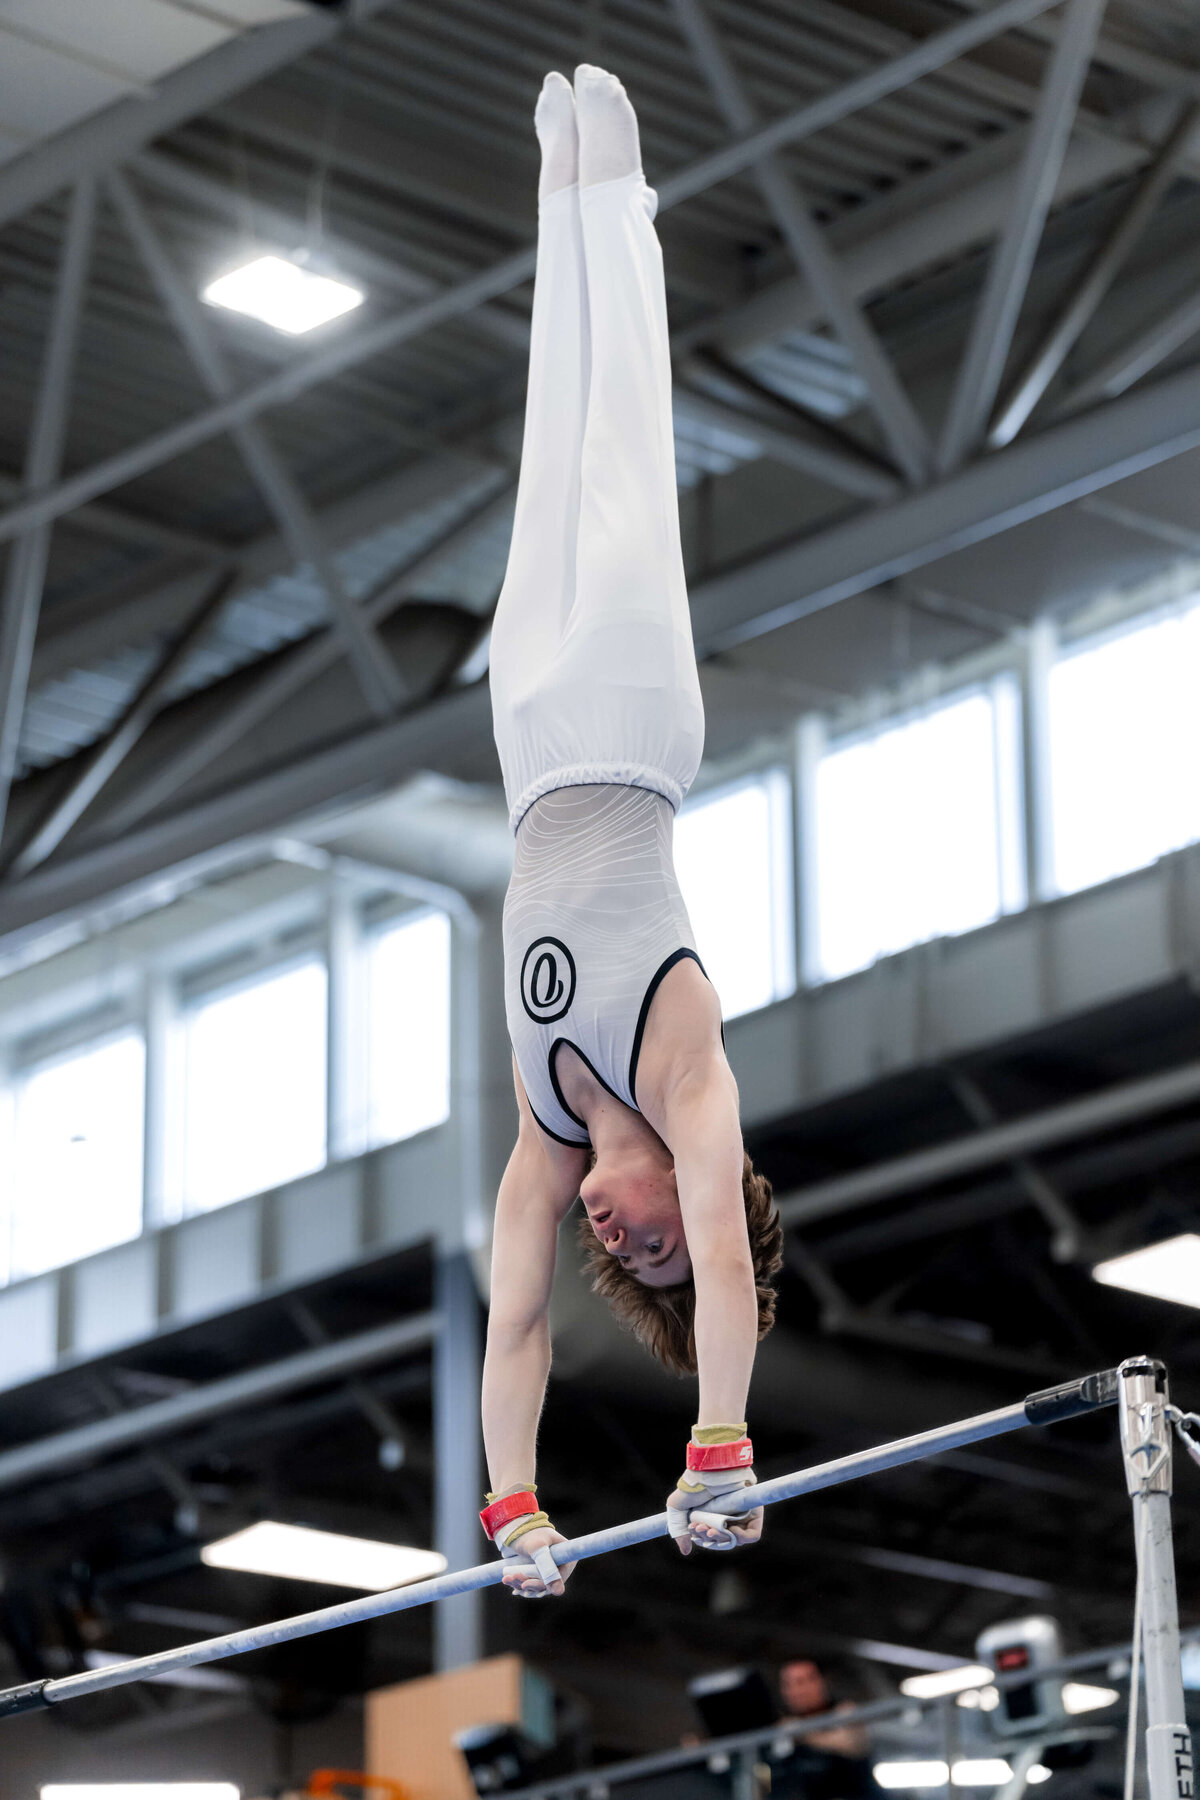 Photo by Luke O'Geil taken at the 2023 inaugural Grizzly Classic men's artistic gymnastics competitionA1_01109